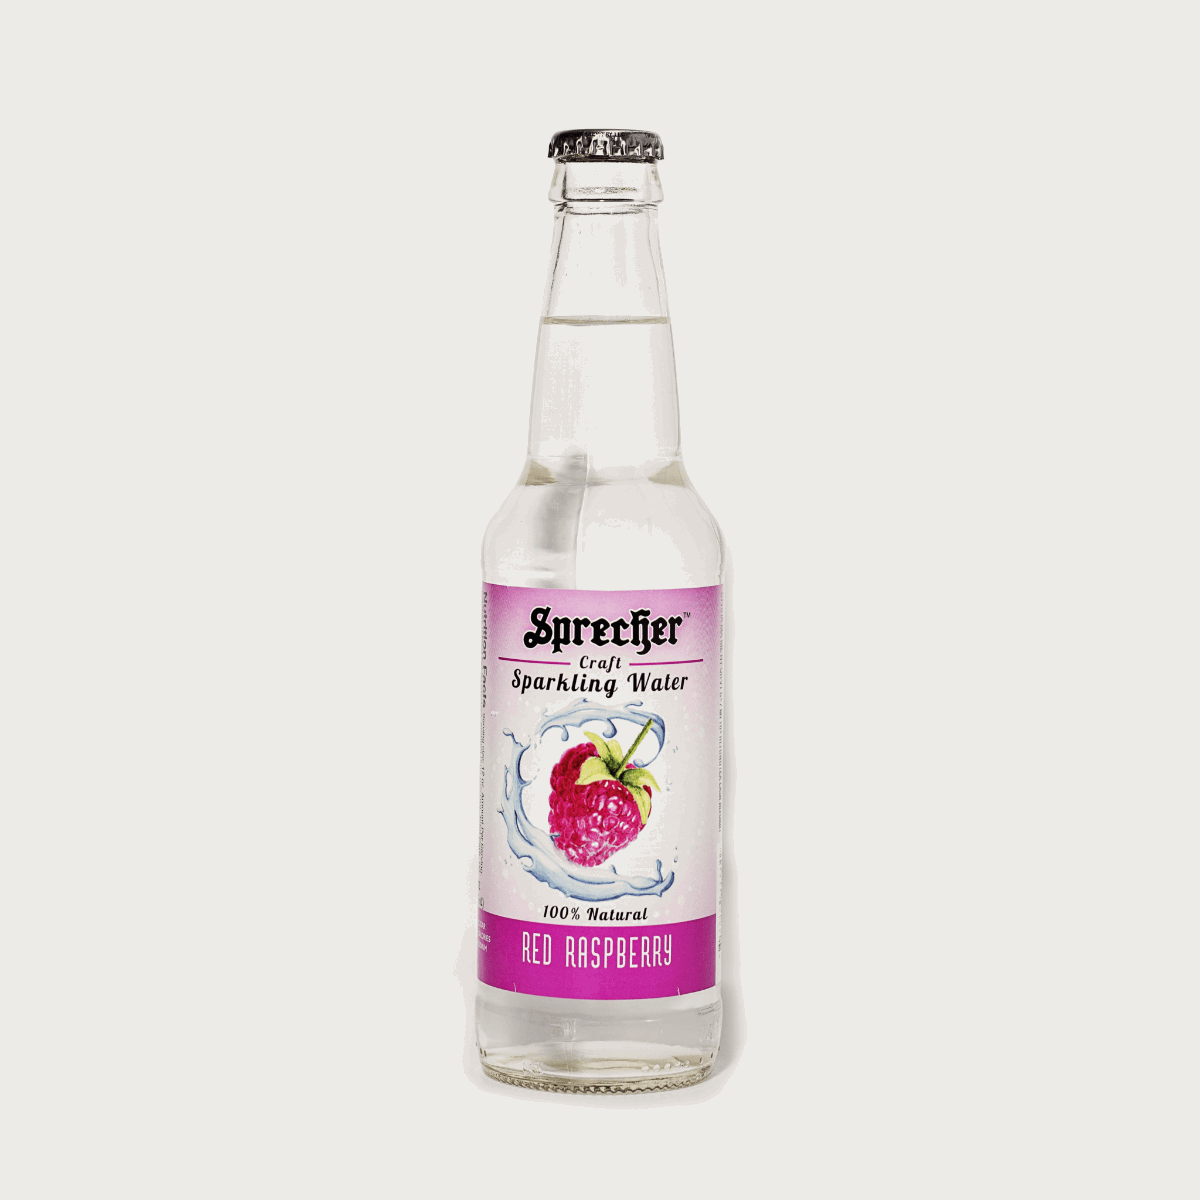 12oz bottle of Red Raspberry Sparkling Water